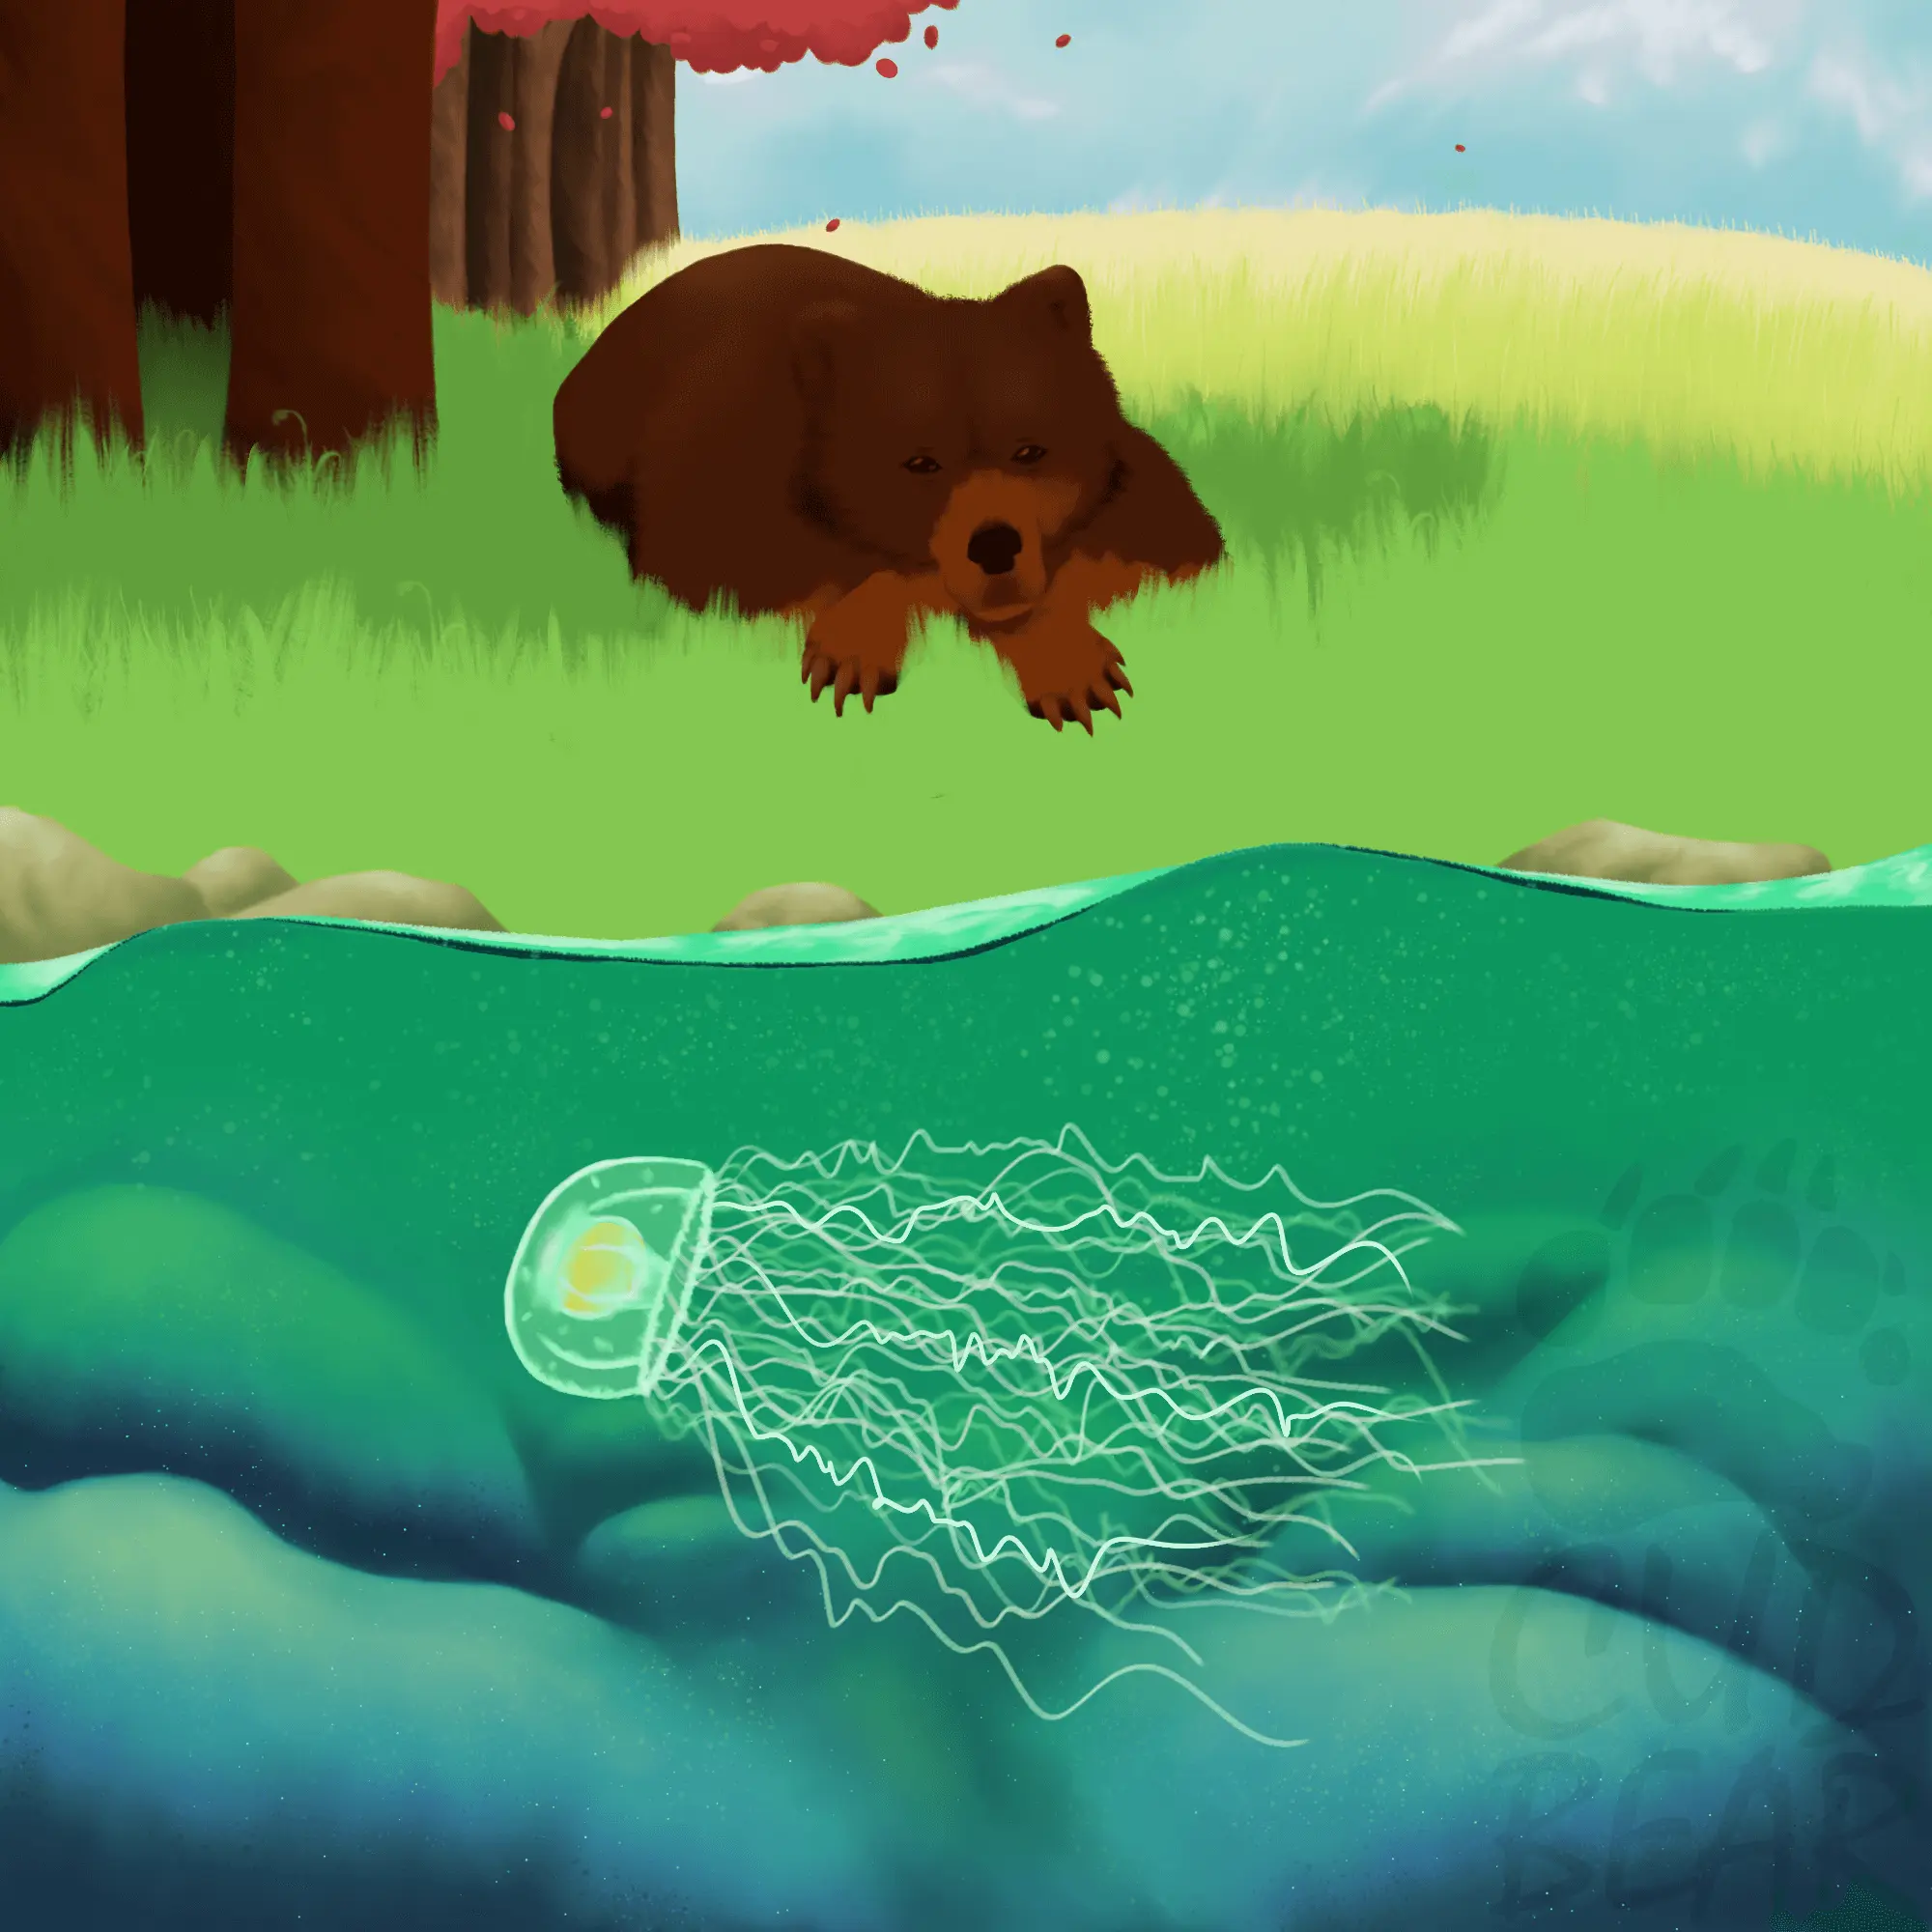 Close-up of a sea jelly in the water and a bear resting below a tree's shadow.